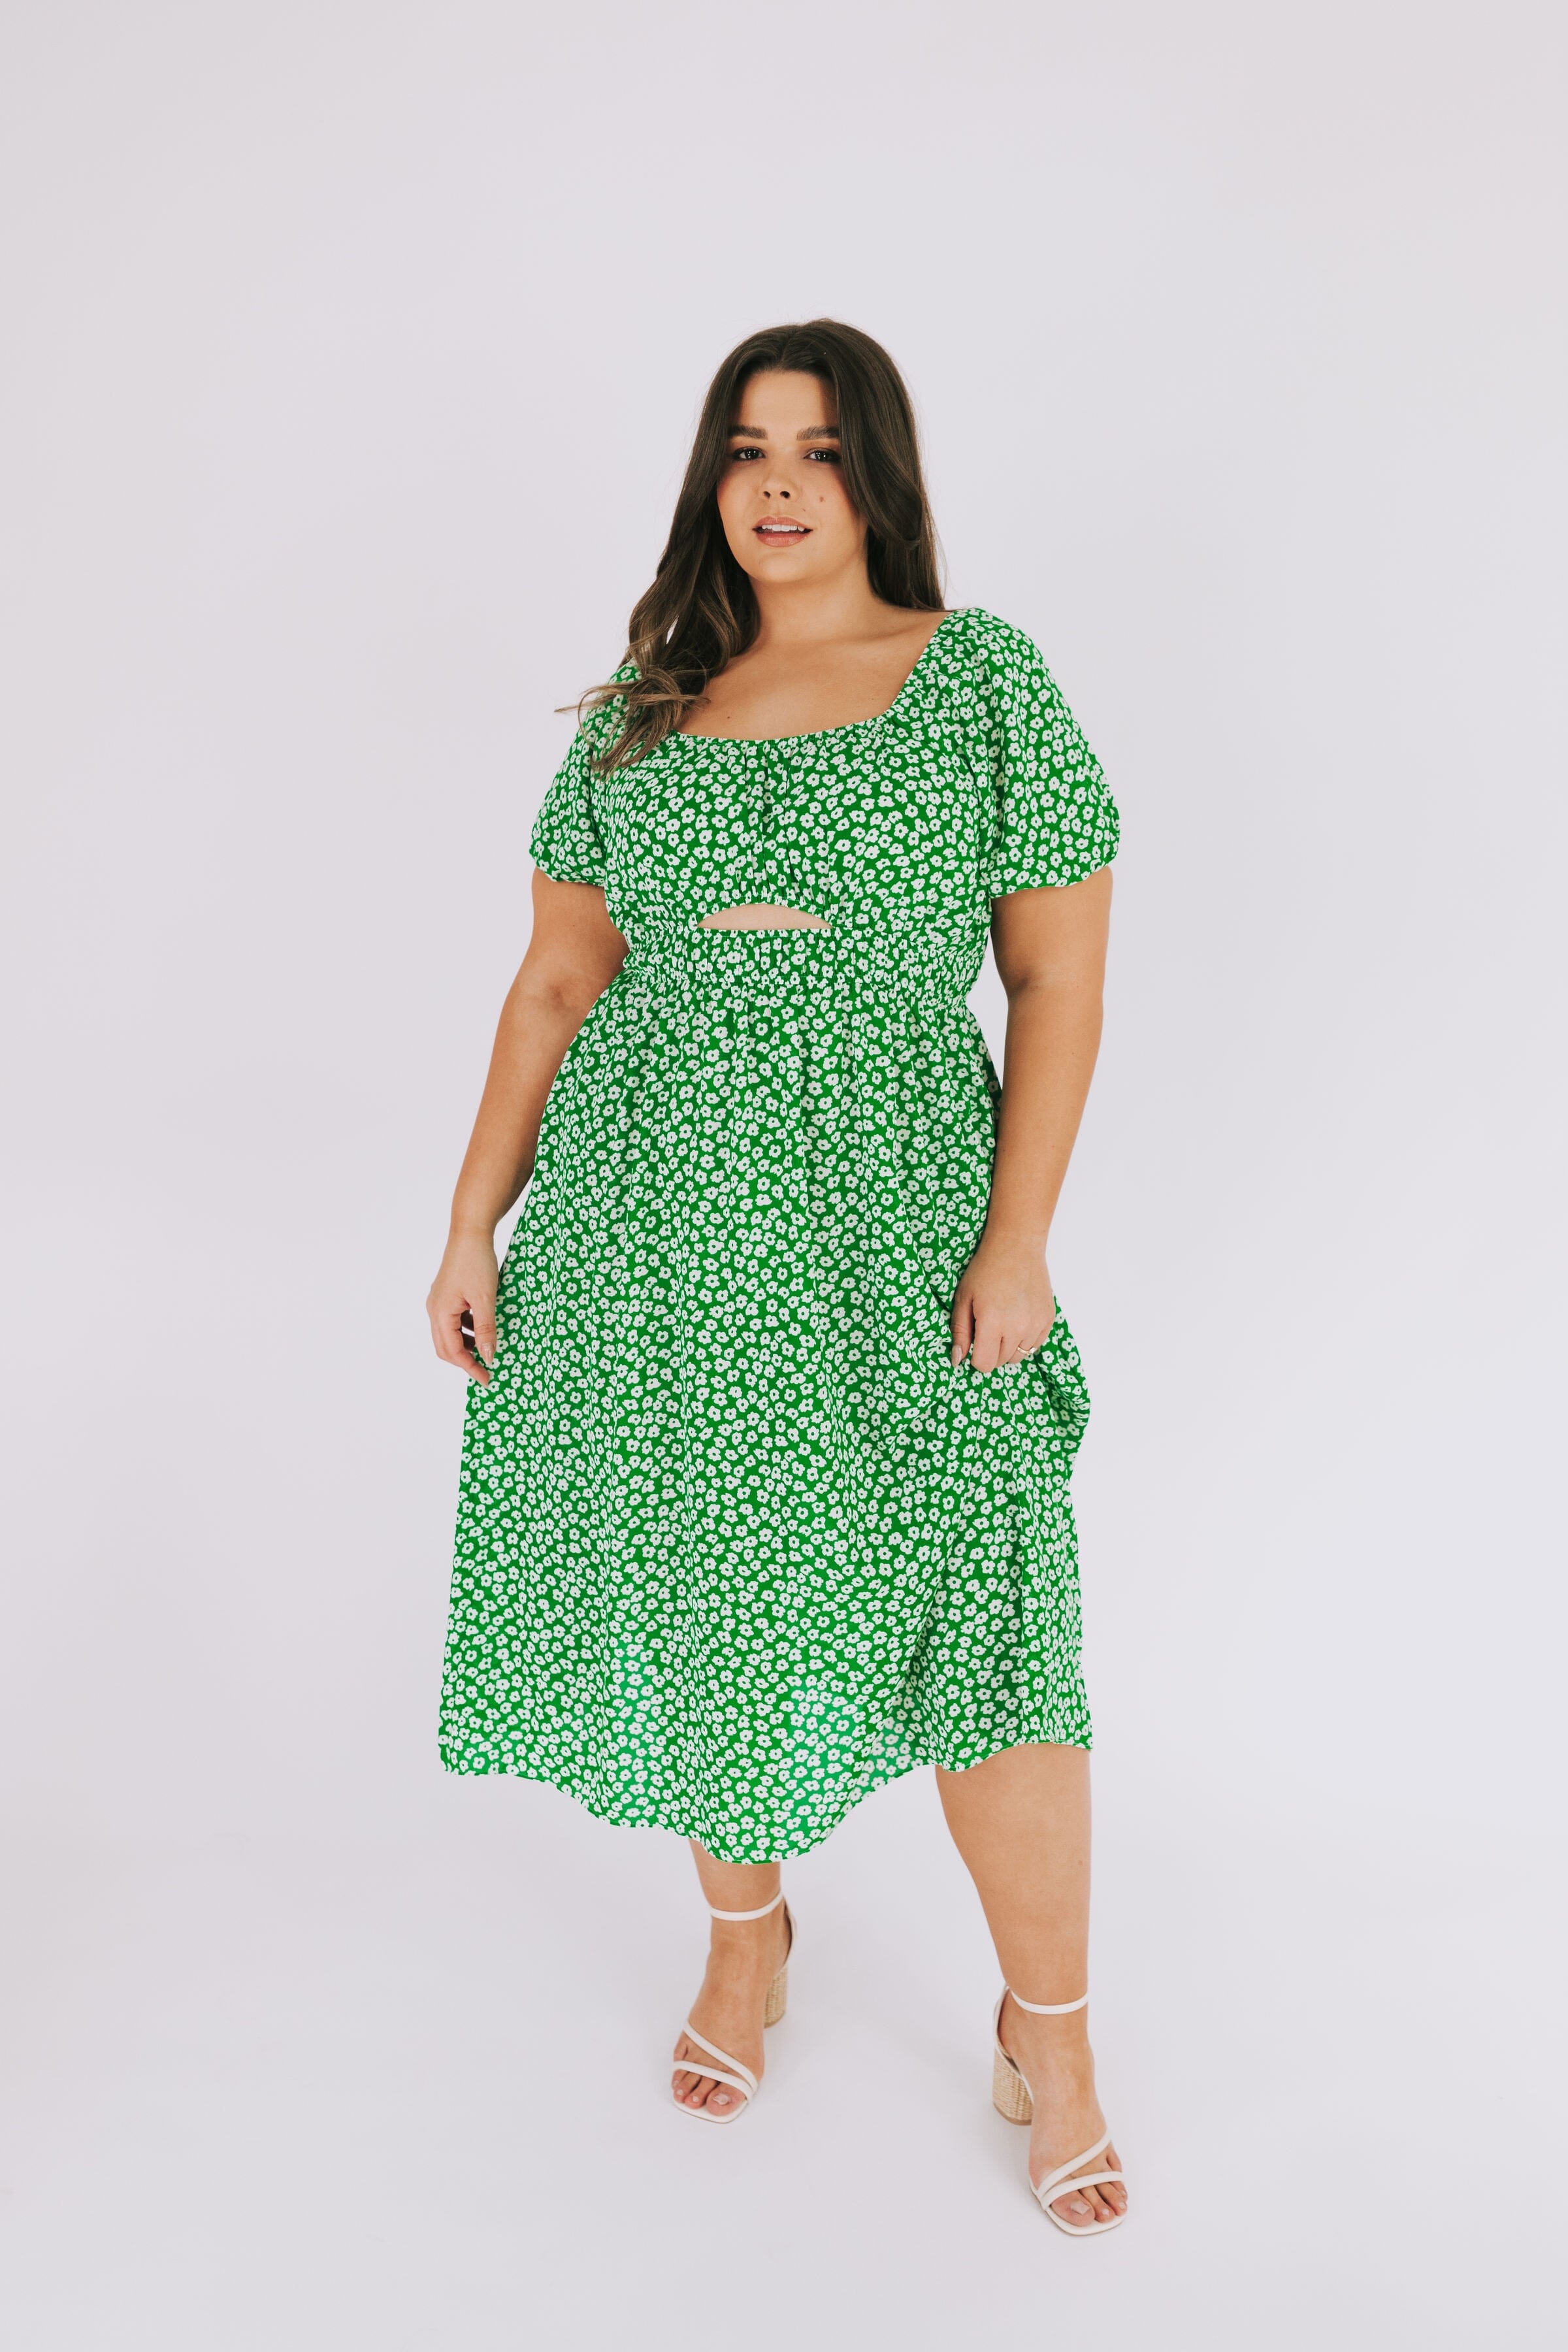 PLUS SIZE - Together Again Dress